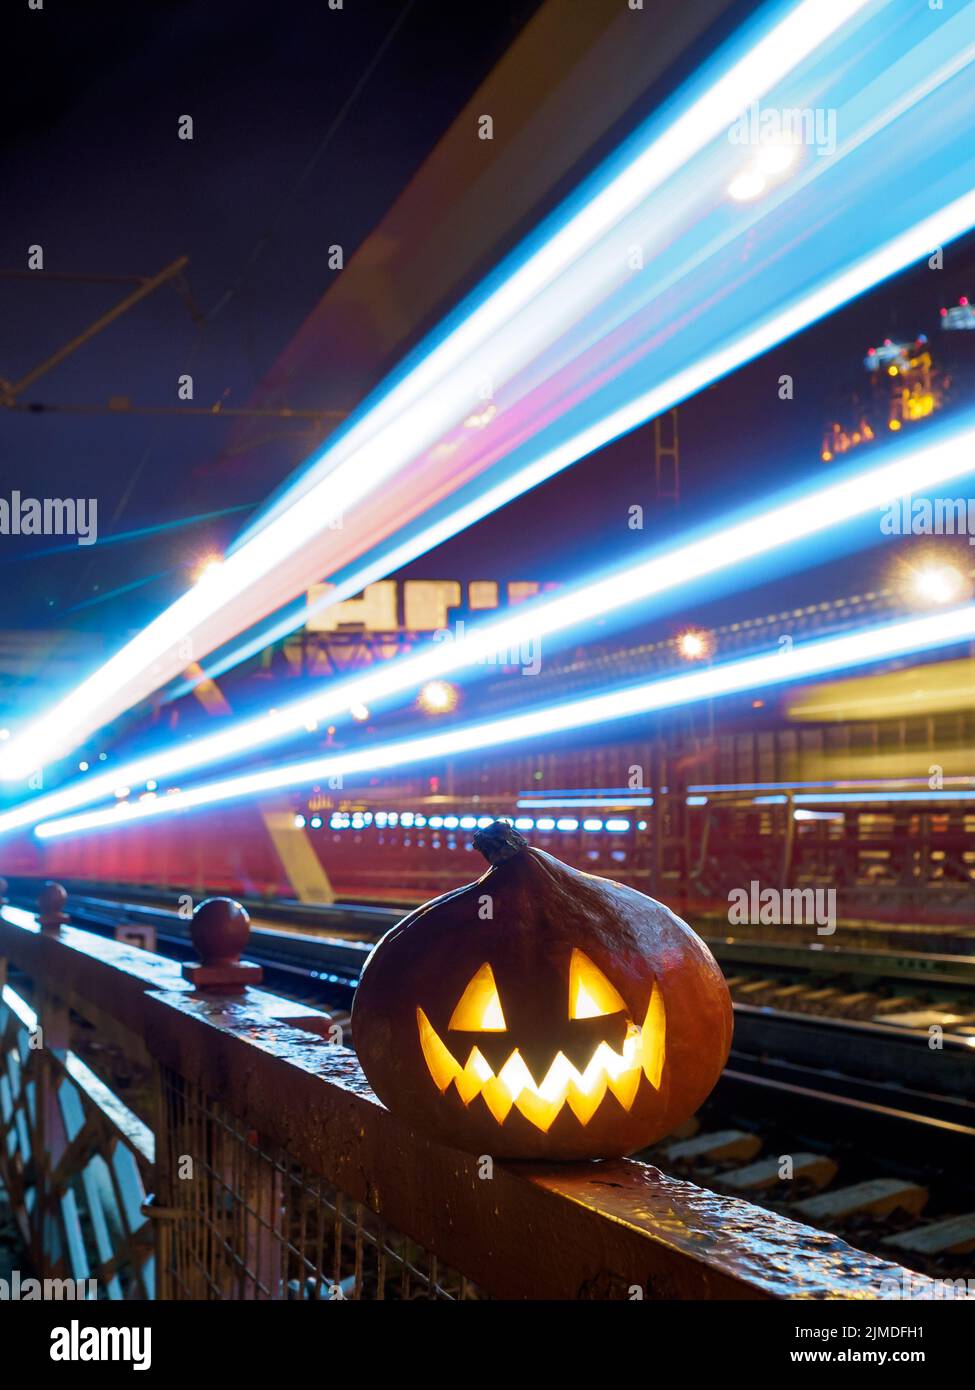 Halloween pumpkin with a glowing grimace at night on the railway bridge. In the background there are rails and blurry streaks of Stock Photo